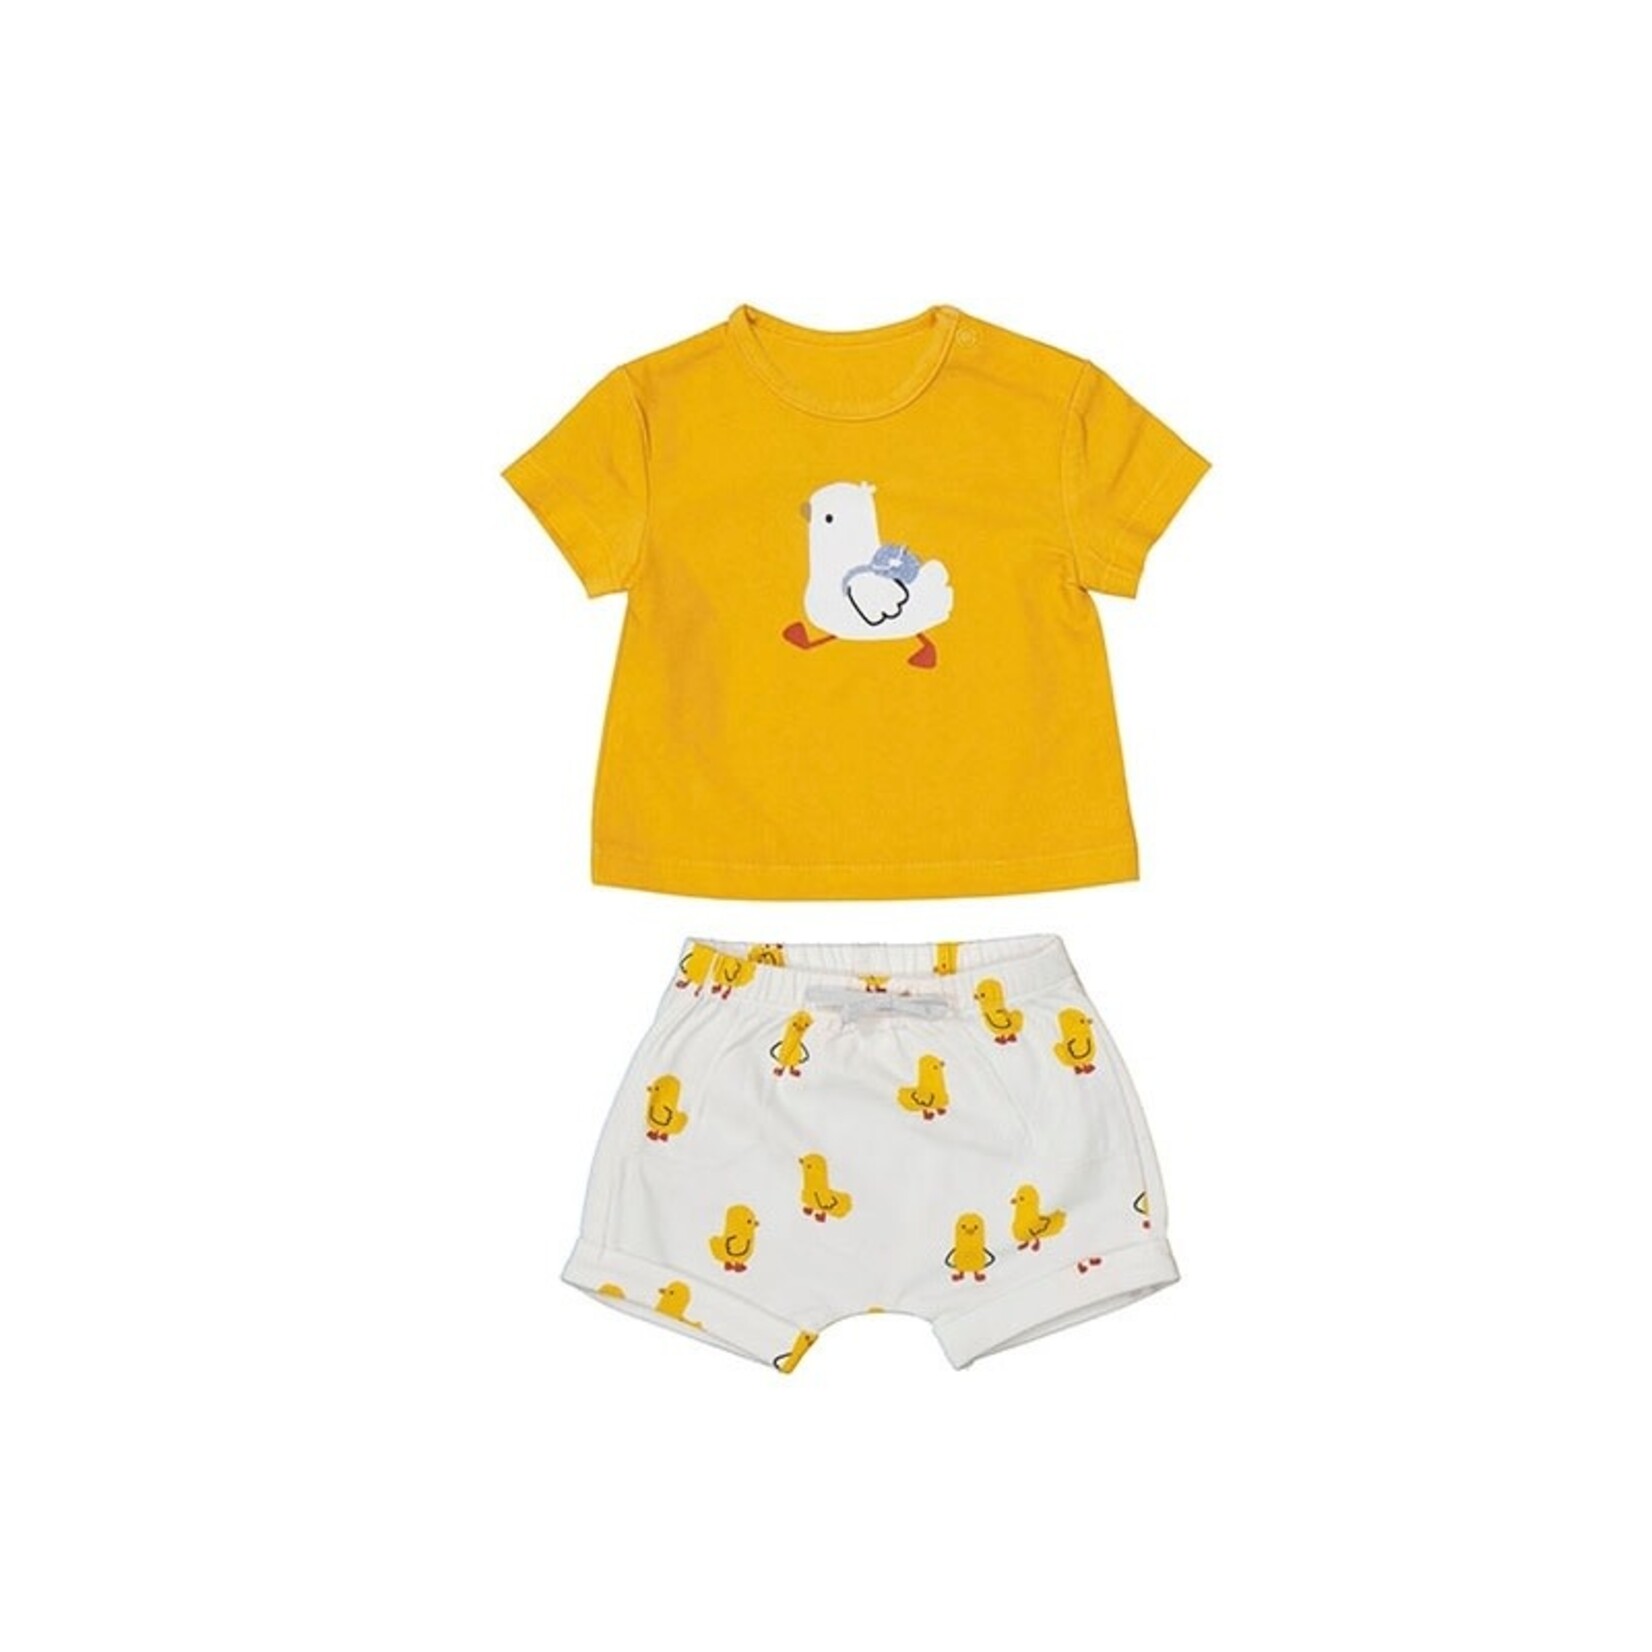 Mayoral MAYORAL - Two-piece Set - Yellow T-Shirt with Duckling Print and White Shorts with All-Over Duckling Print